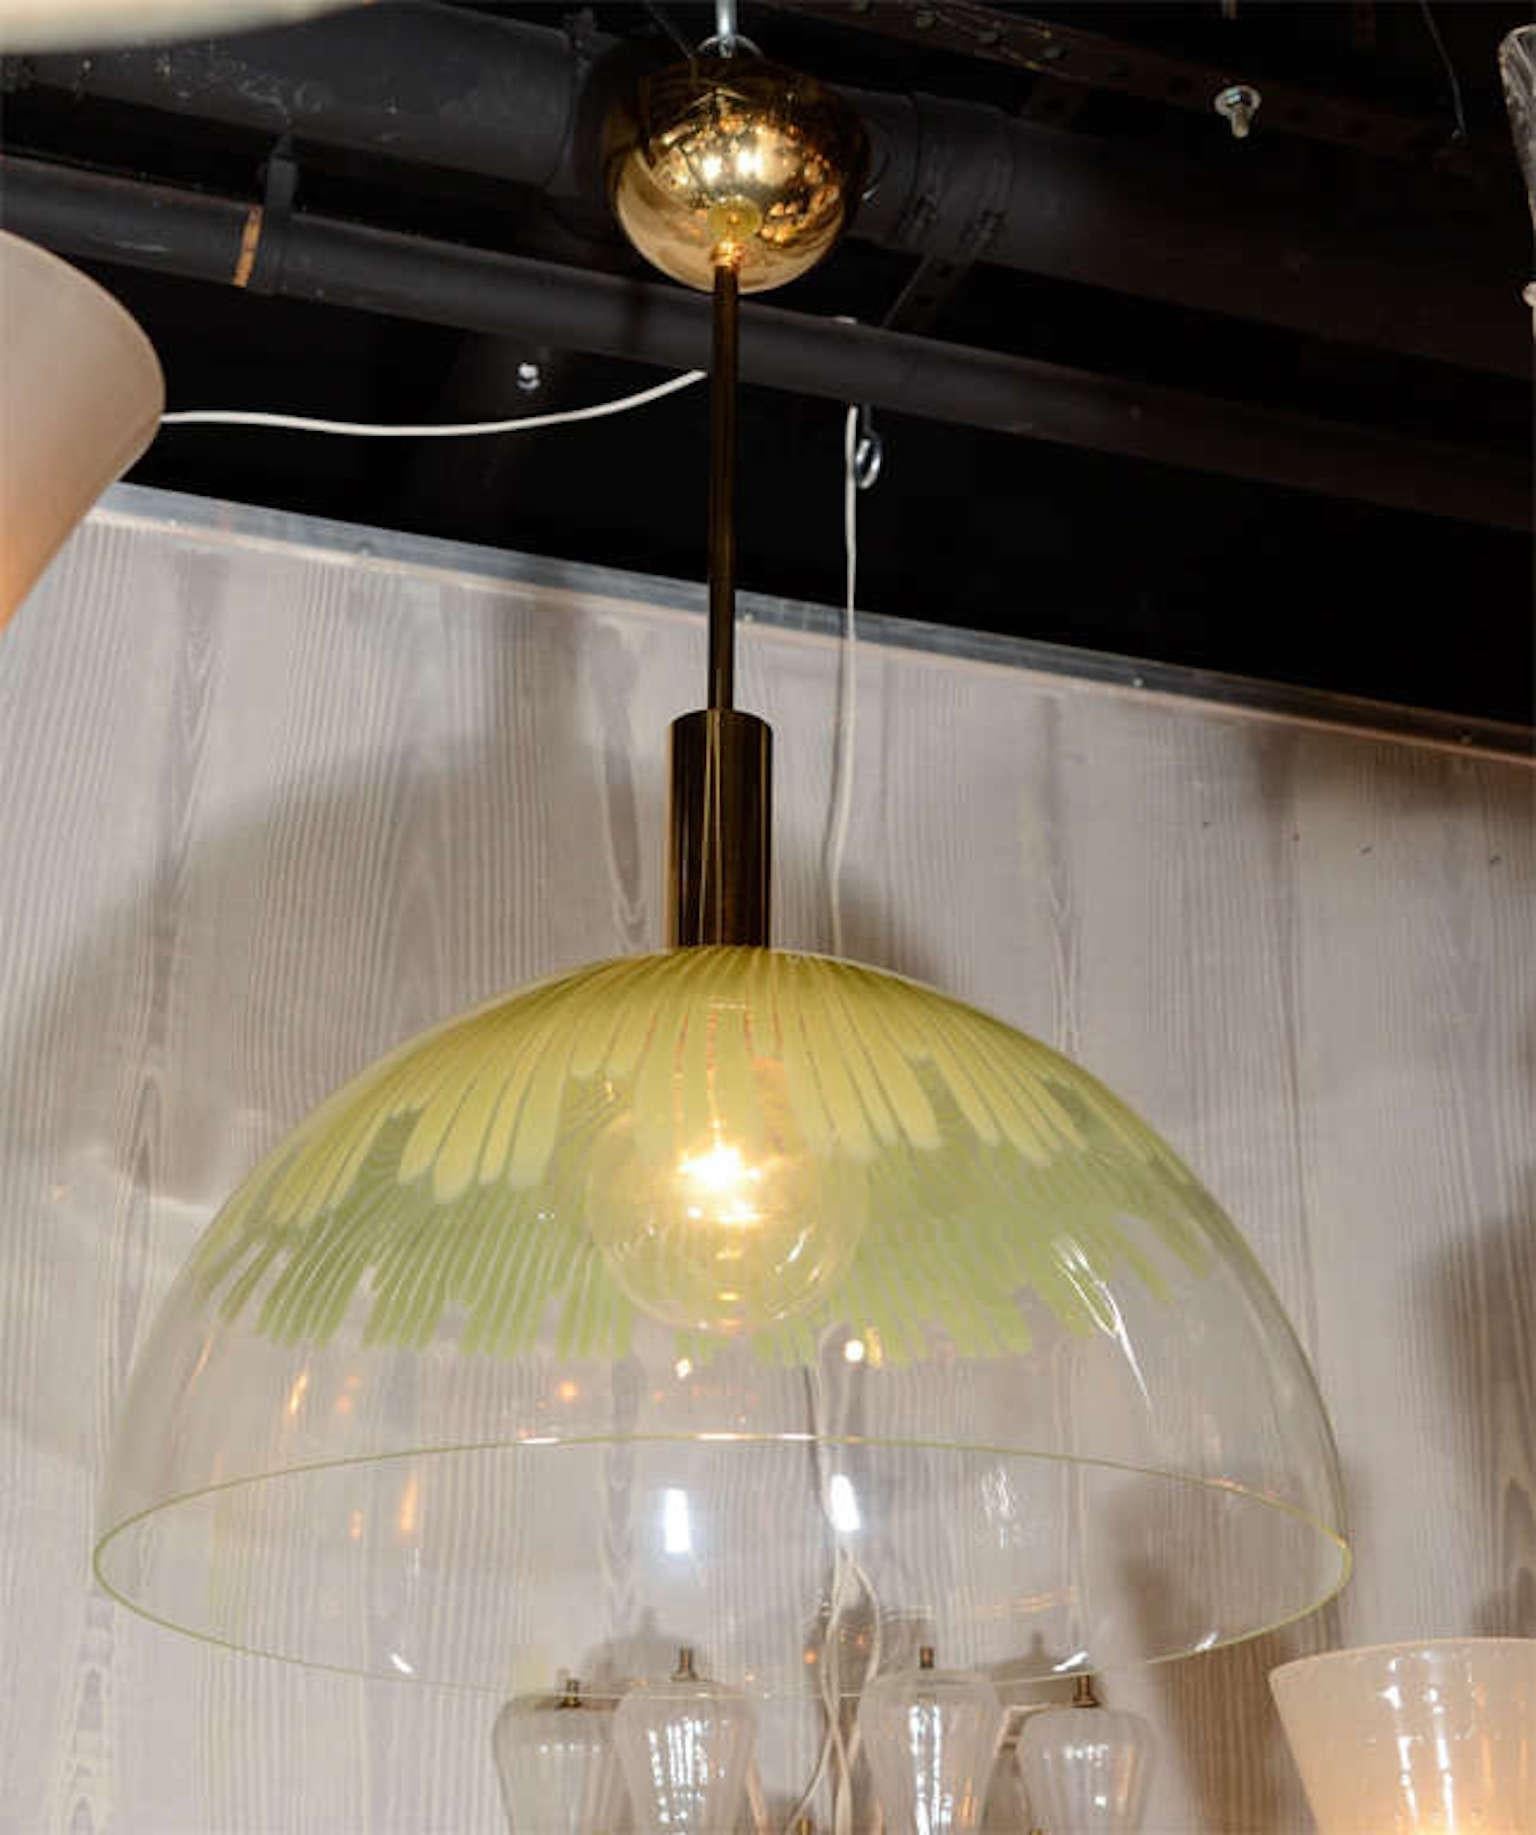 A documented pendant light by designed Ludovico Diaz de Santillana. Santillana was the director and a designer for the famed glass house Venini from 1959-1985. Dome shade is hand blown clear glass with green stripes suspended from a gold plate on